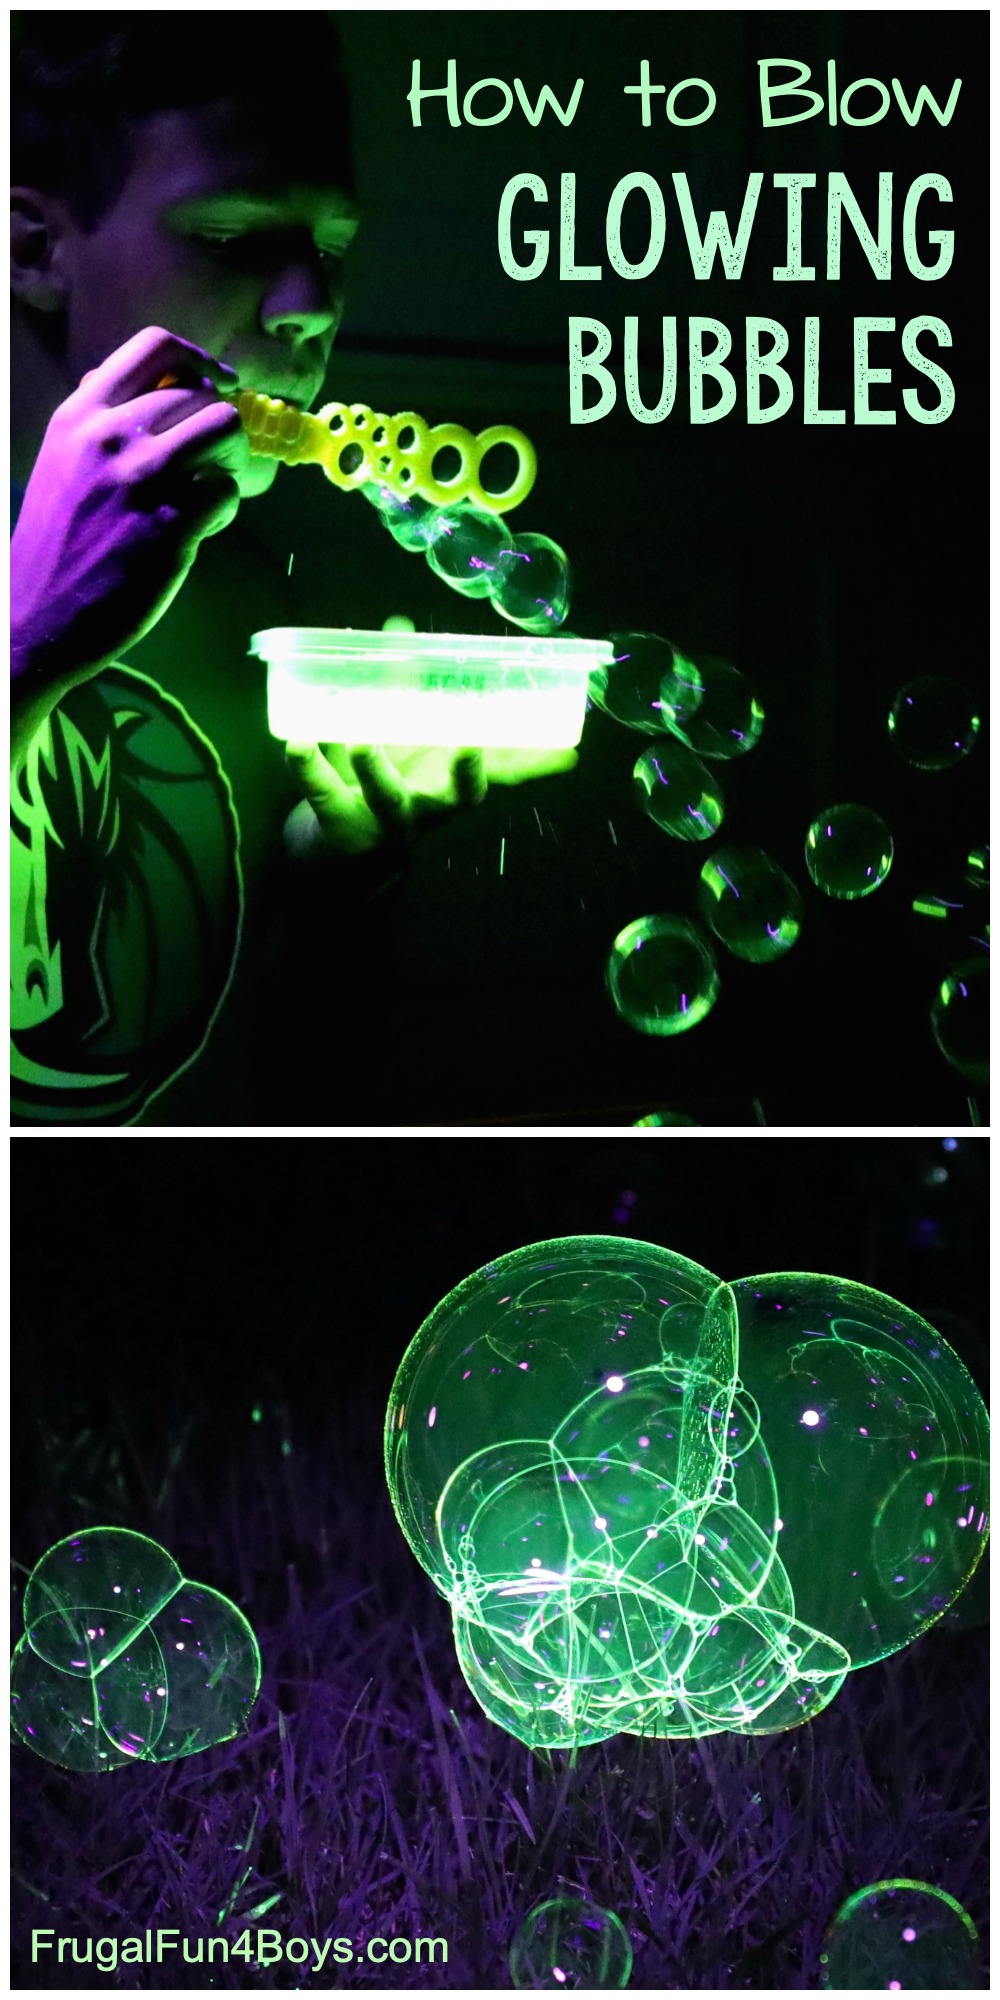 How to Make Glowing Bubbles